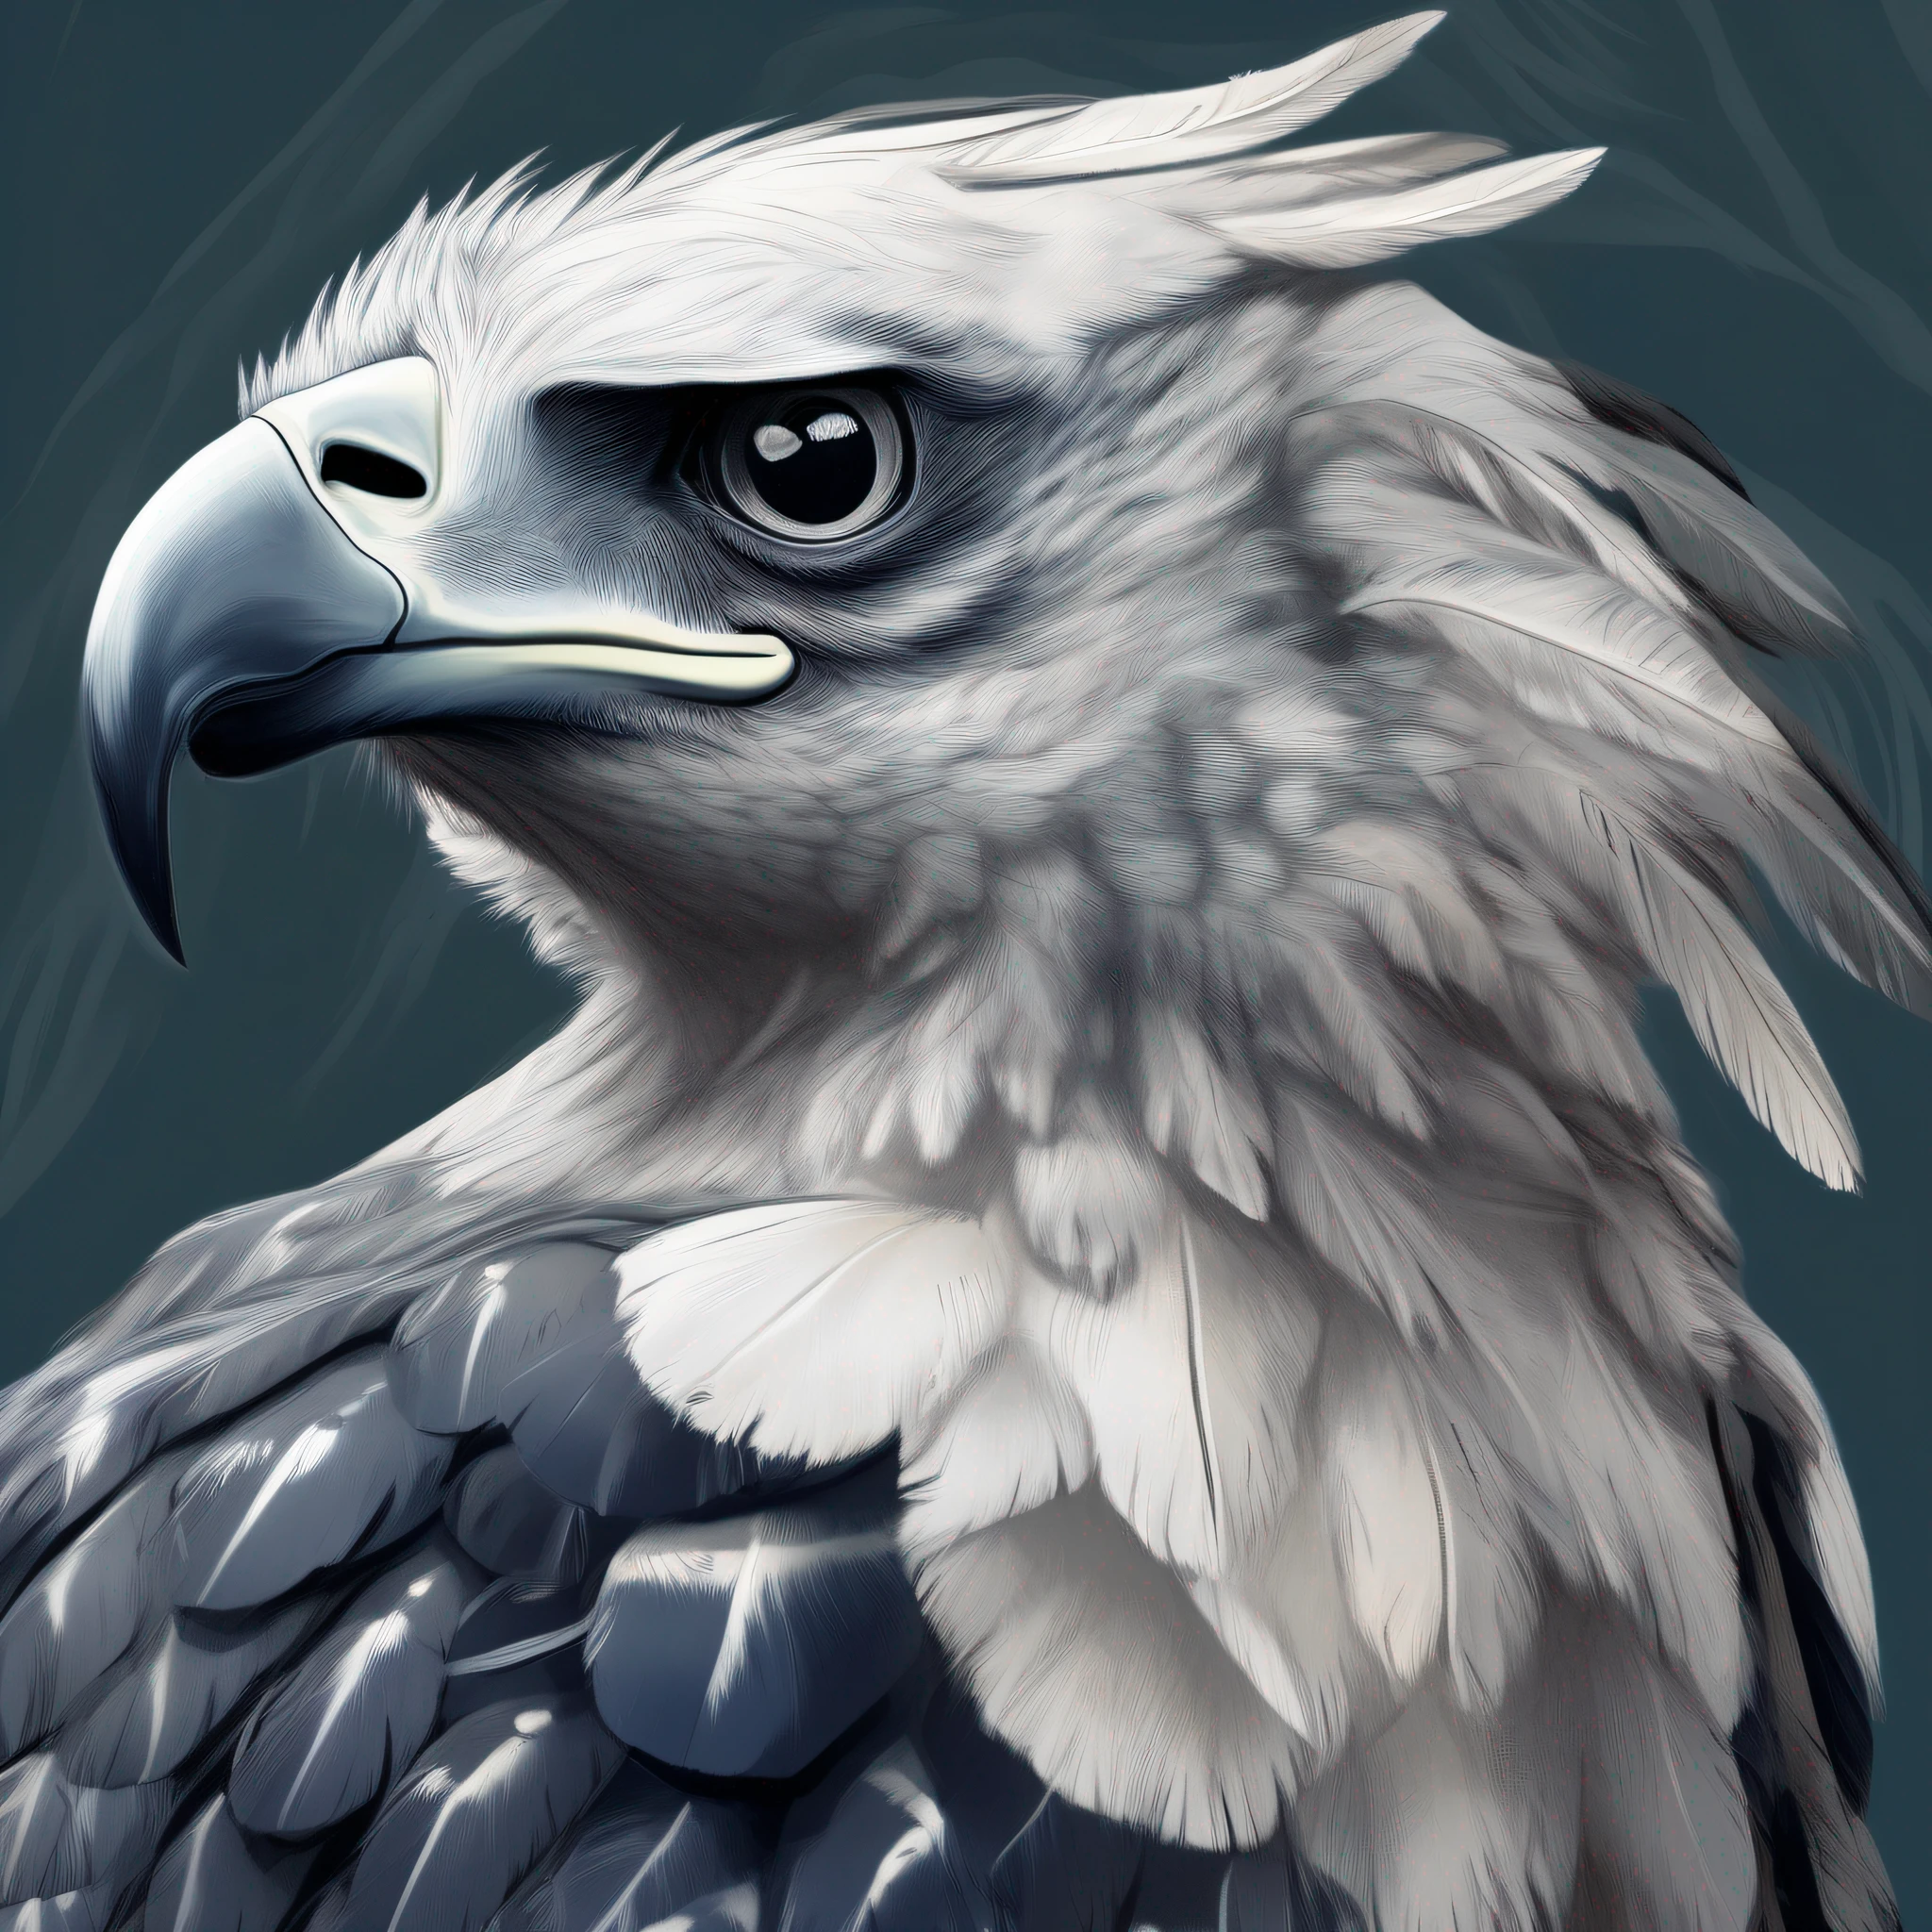 This digital drawing of an eagle-harpy eagle is a tribute to the